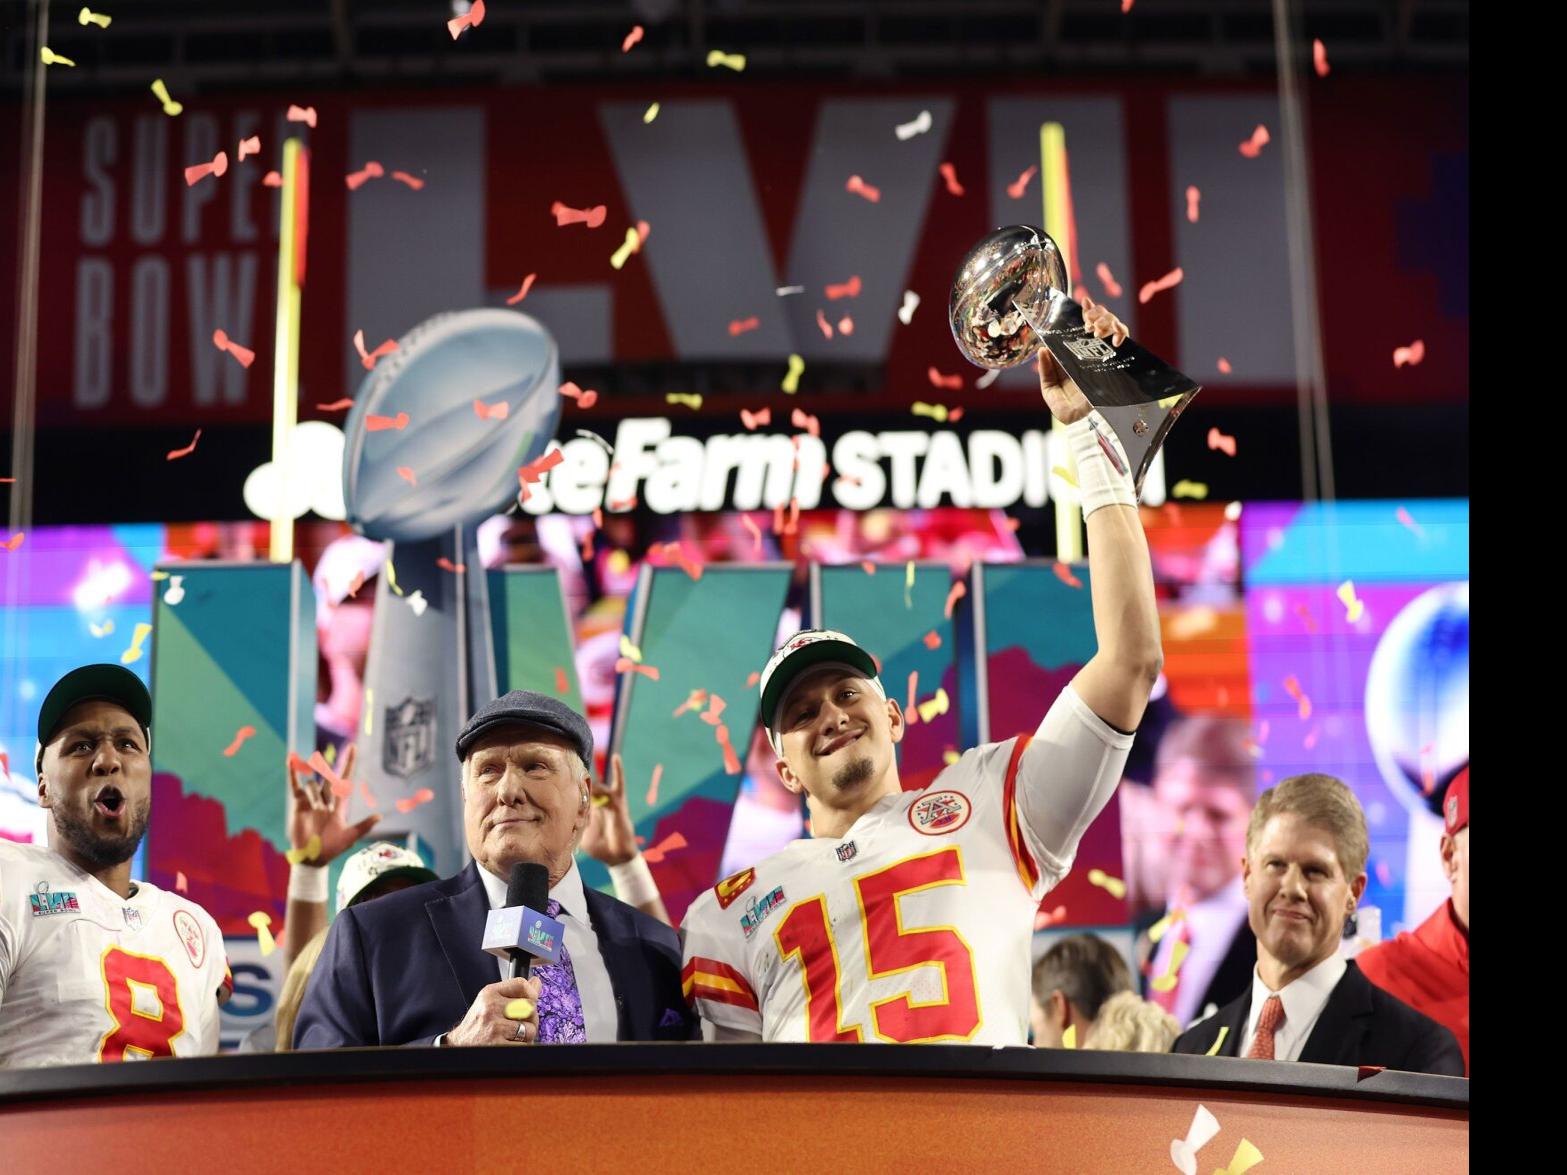 Kansas City Chiefs to celebrate Super Bowl LVII with fans at NFL opener